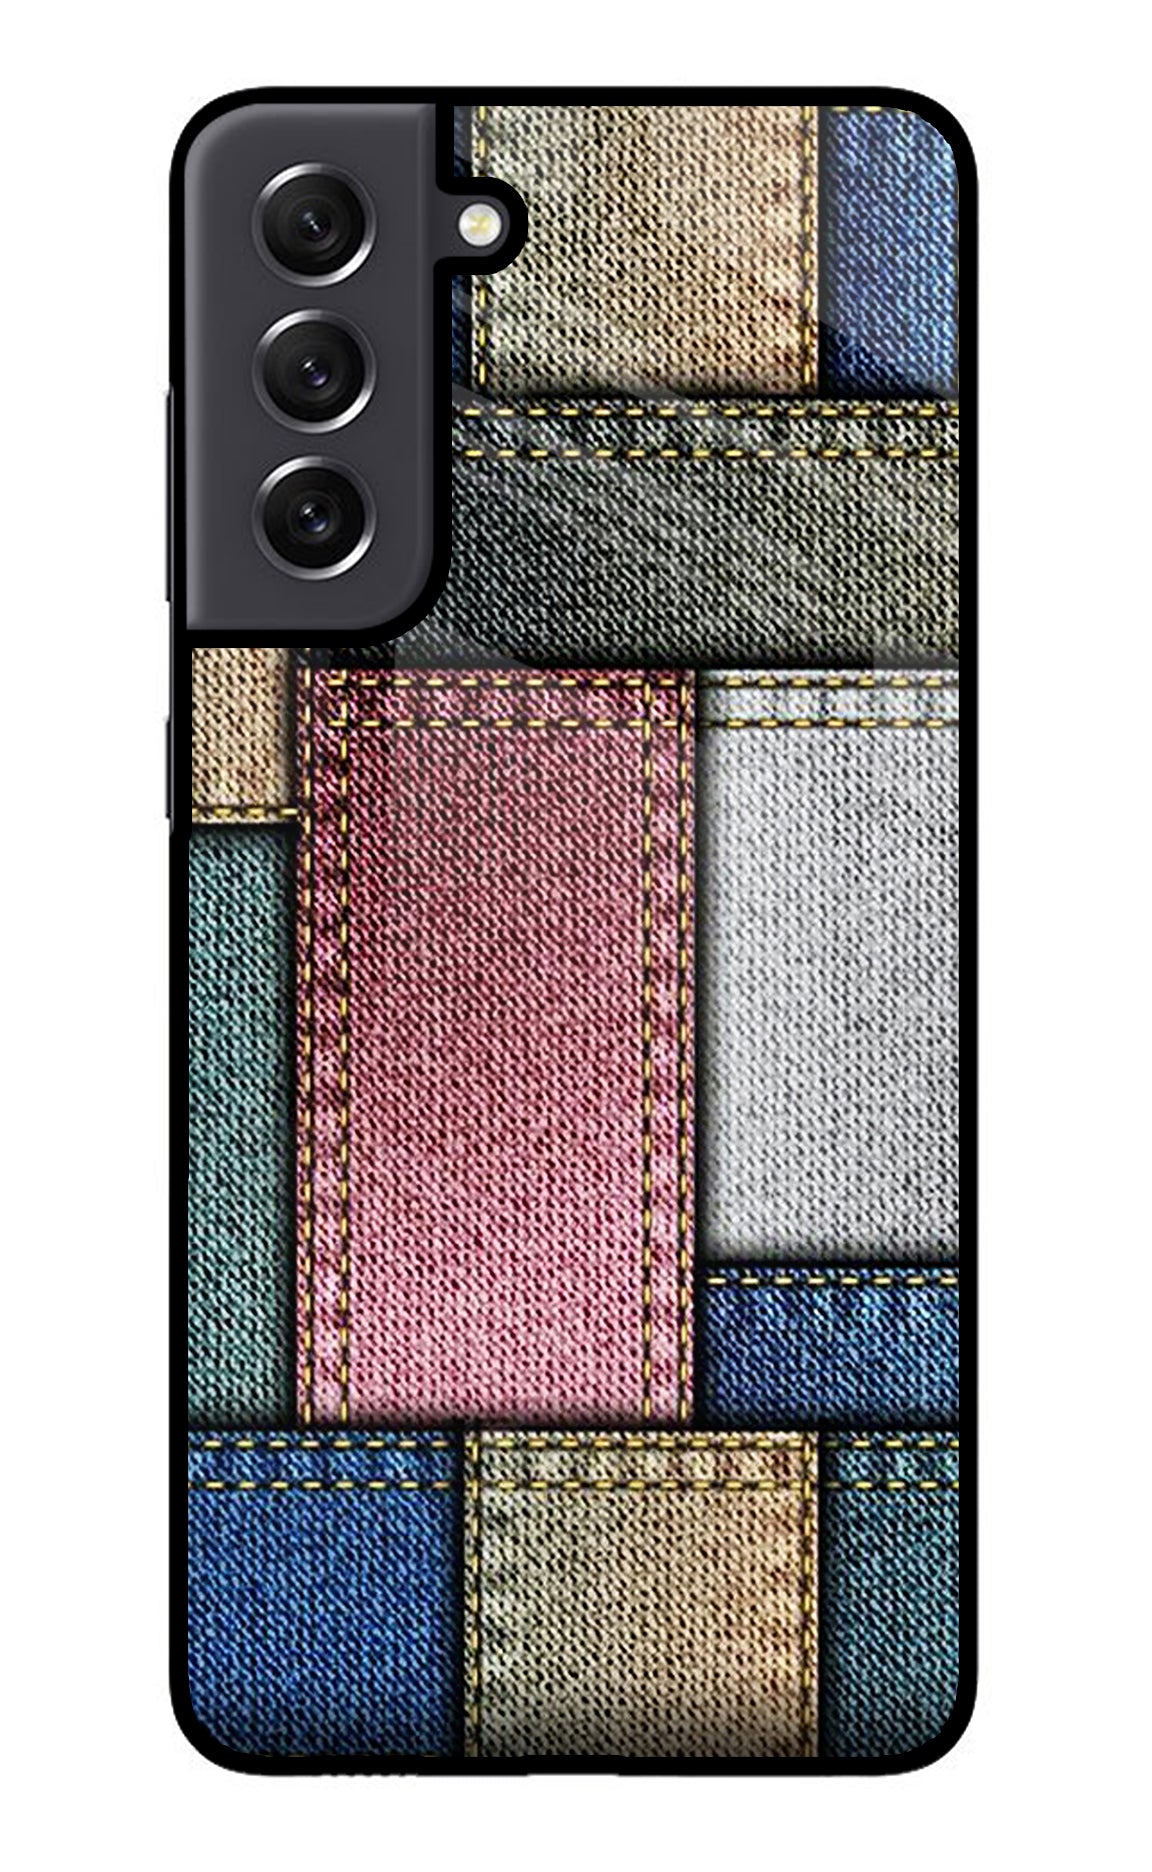 Multicolor Jeans Samsung S21 FE 5G Back Cover